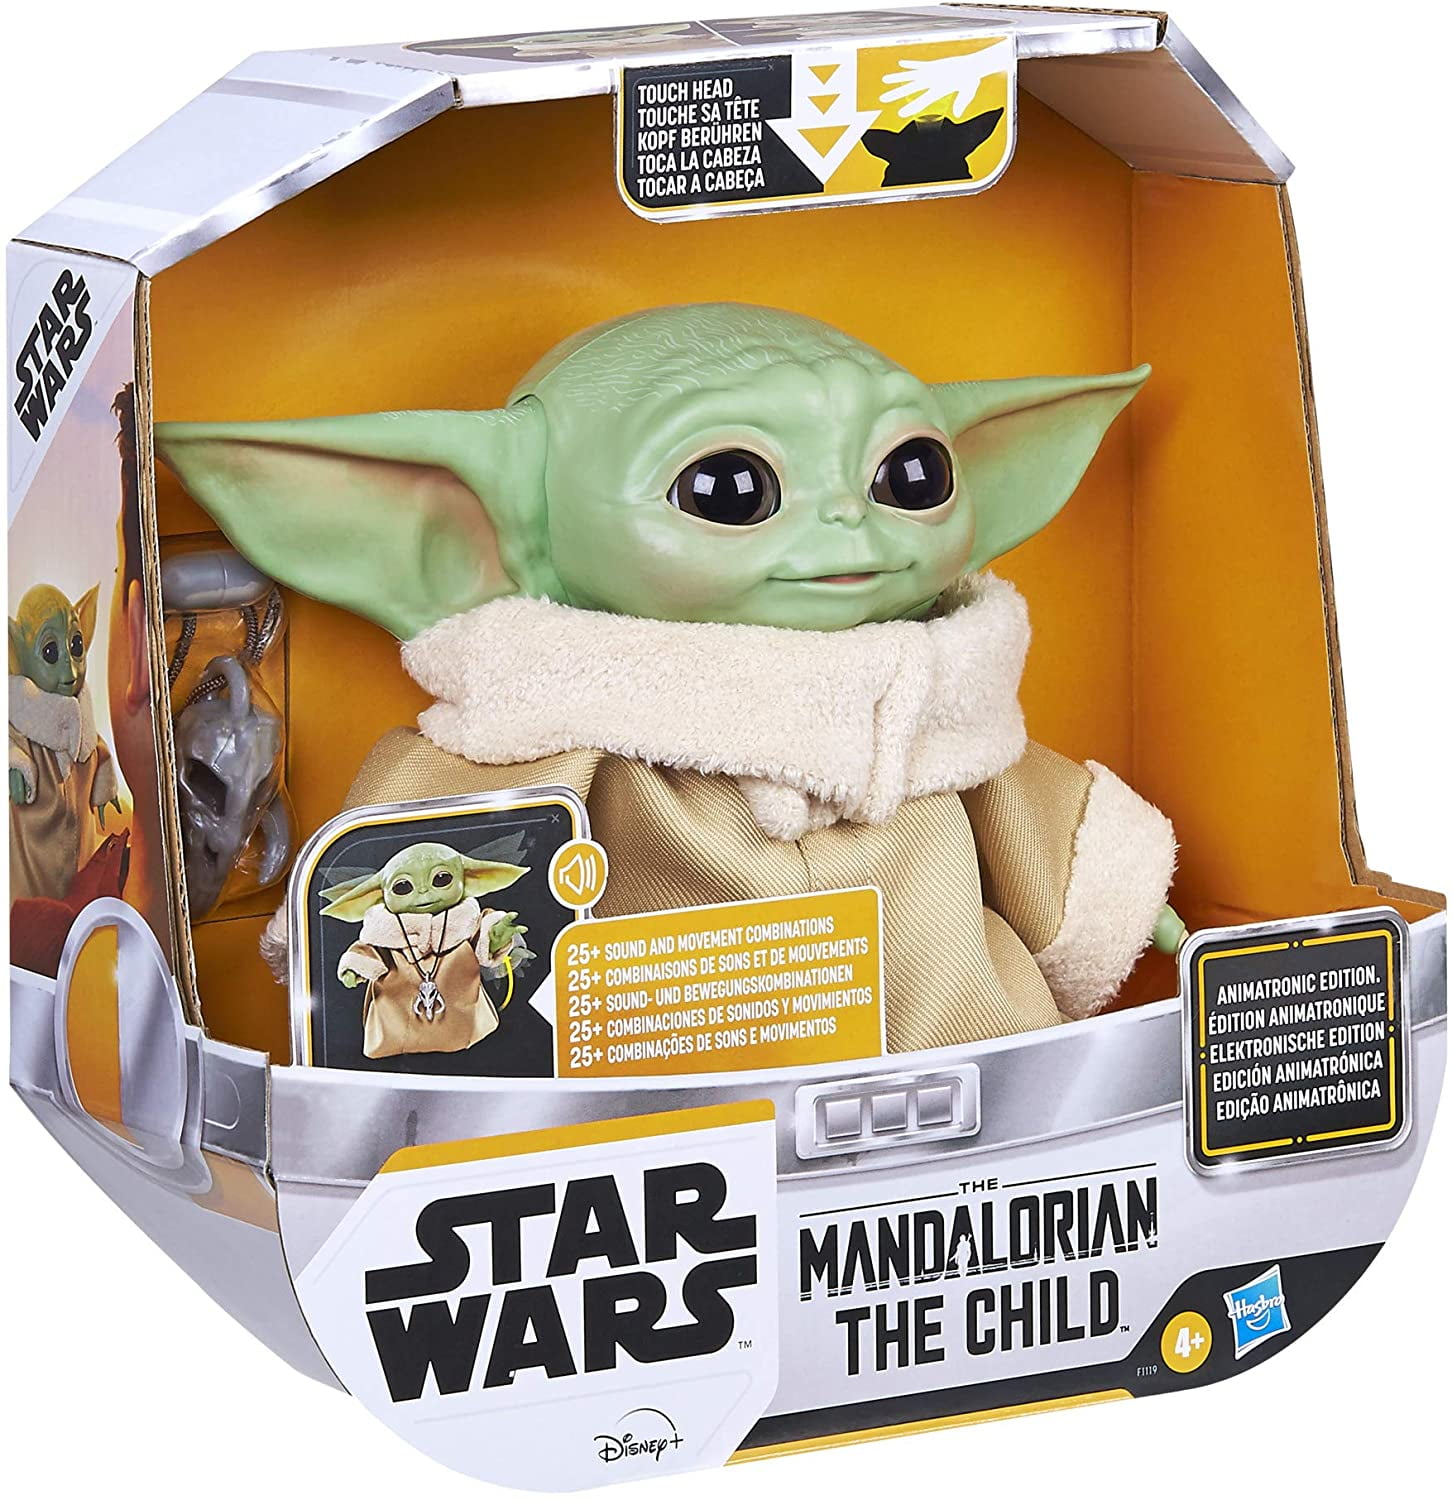 F1119 for sale online Hasbro Star Wars Baby Yoda The Child Animatronic Edition Action Figure